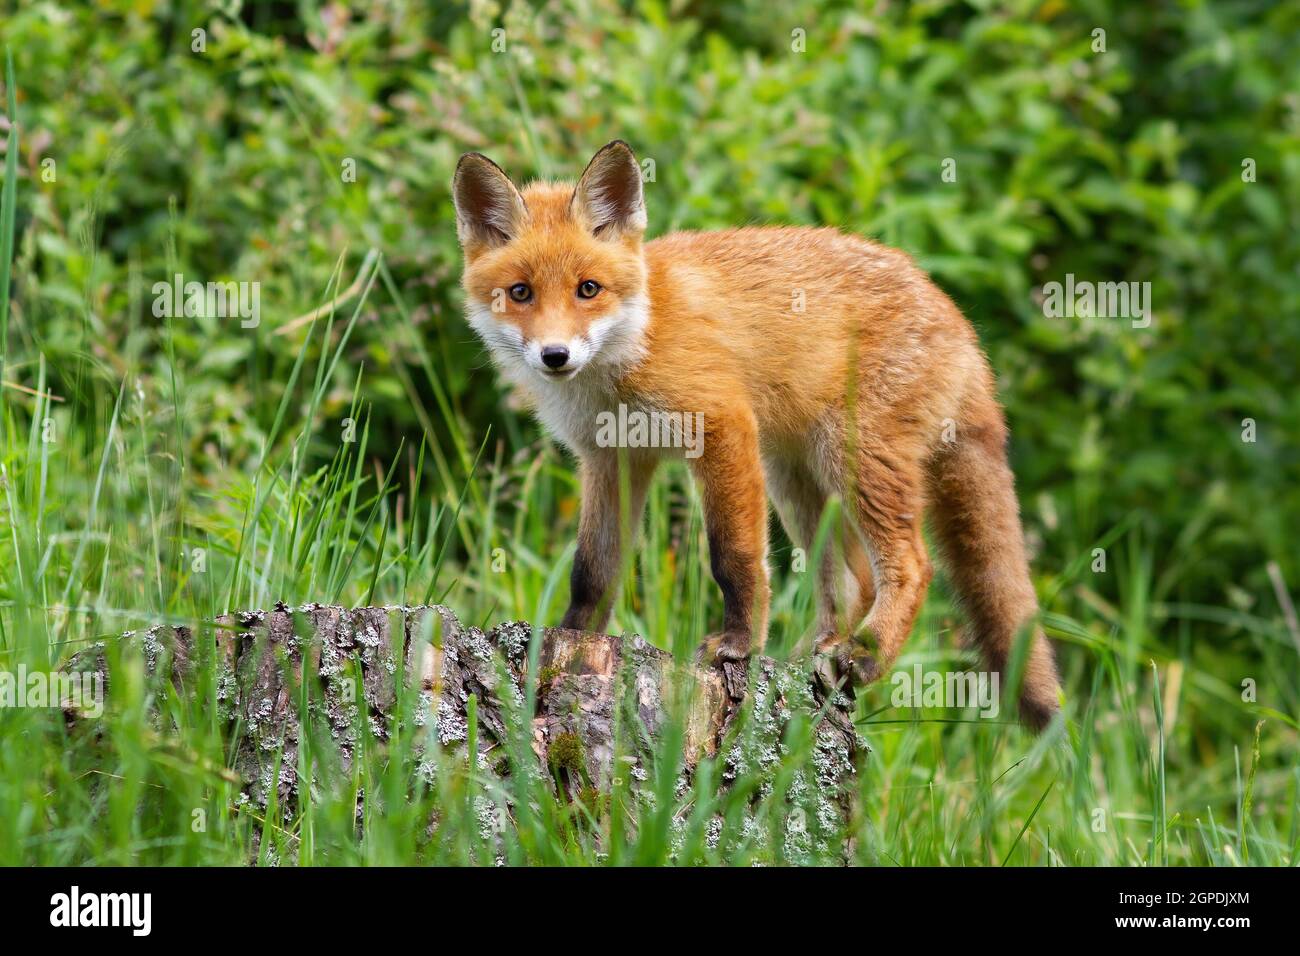 Cute potrait of young red fox, vulpes vulpes, standing on the stub in the forest. Curious orange canine posing in the grass culms. Interested wild ani Stock Photo